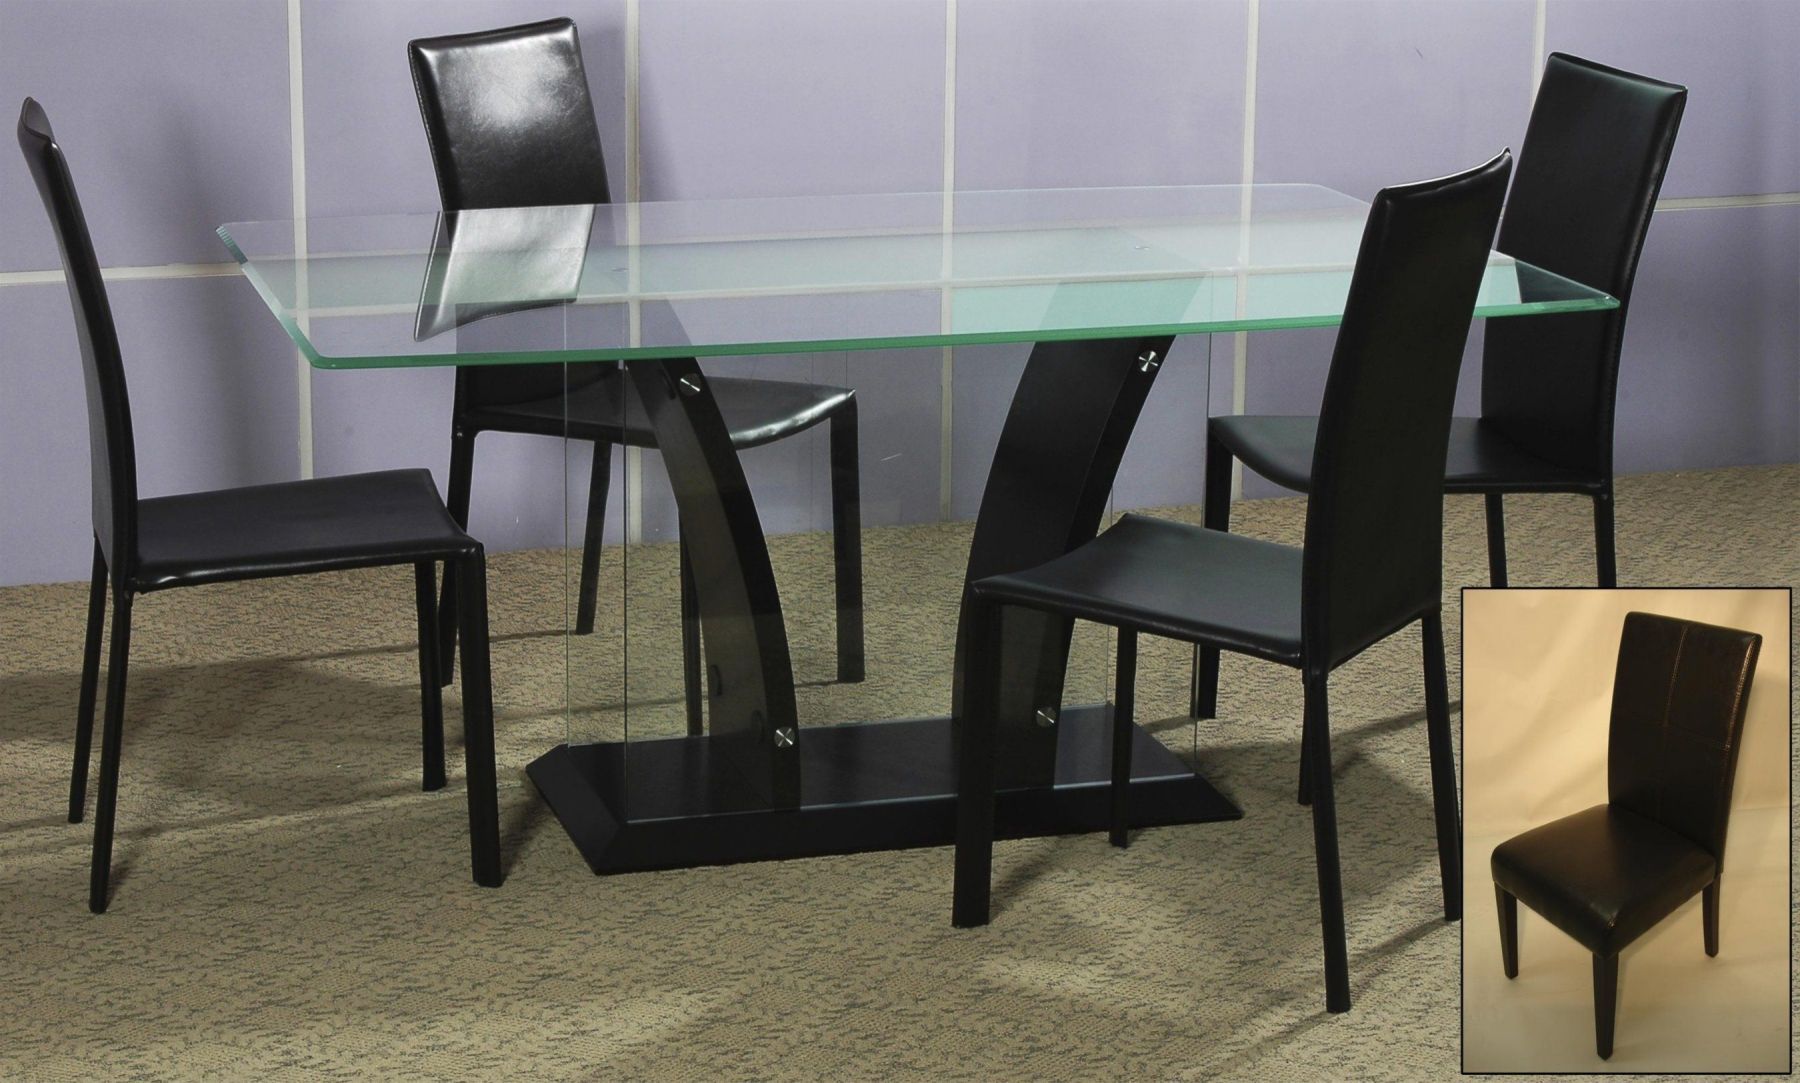 Chintaly Dinette Set  Price Upon RequestCall (631) 742-1351 for Best Price Guarantee